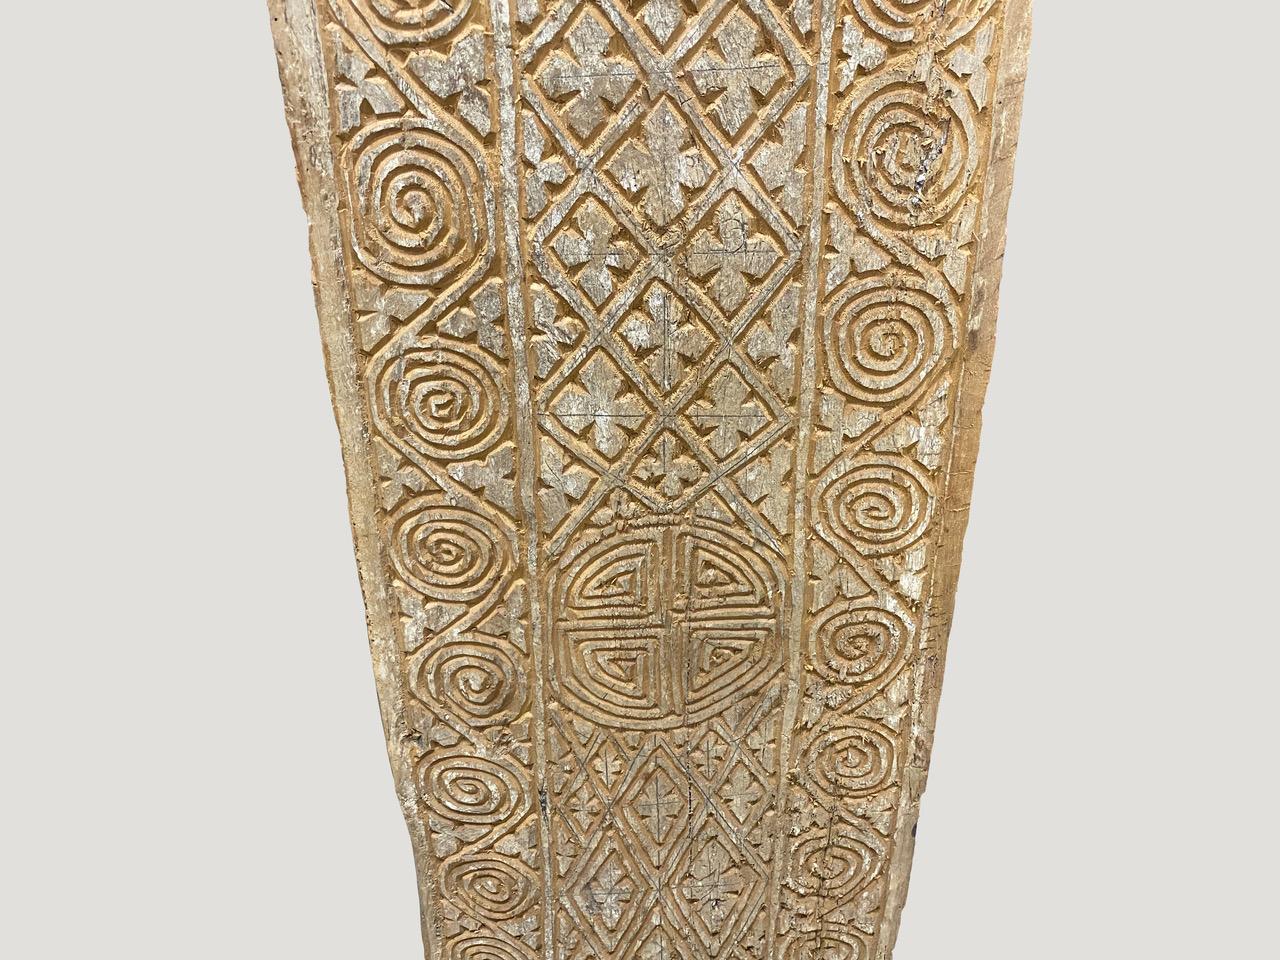 Ancient hand carved architectural panel from Toraja. The carving symbolizes both the protection of the home and fertility. Originally used as an exterior panel.

This panel was sourced in the spirit of wabi sabi, a Japanese philosophy that beauty